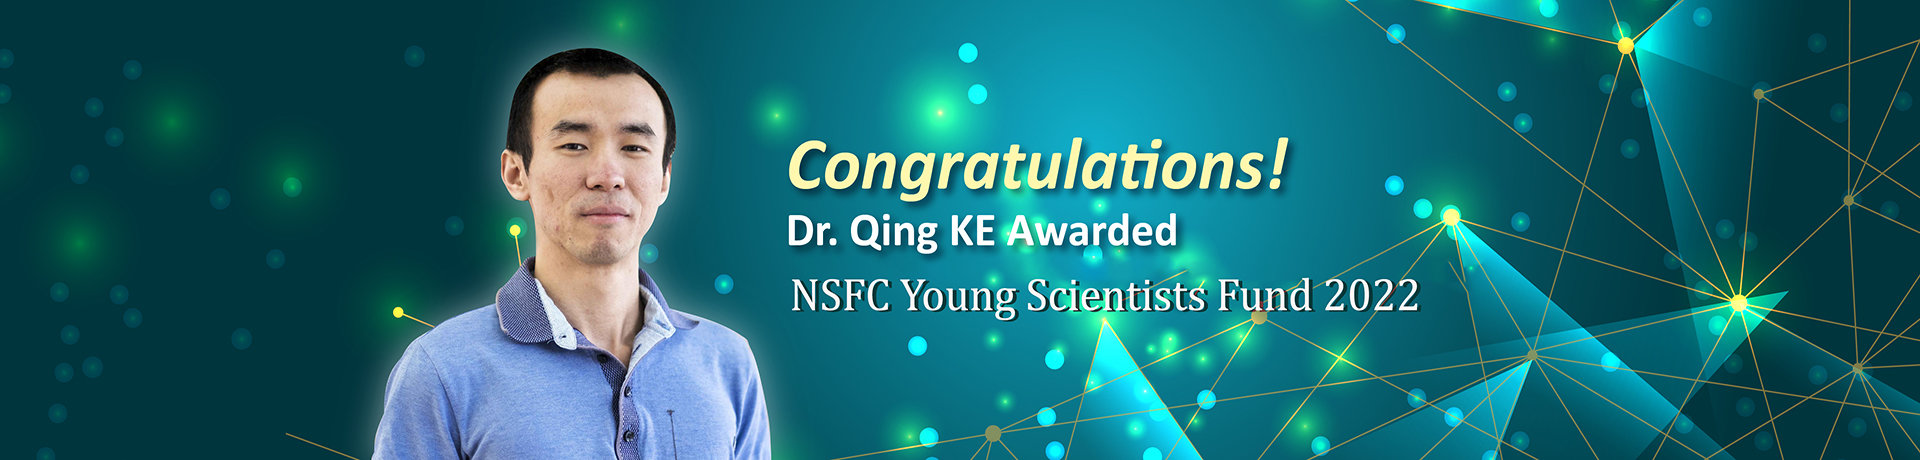 Dr. Qing KE Awarded NSFC Young Scientists Fund 2022